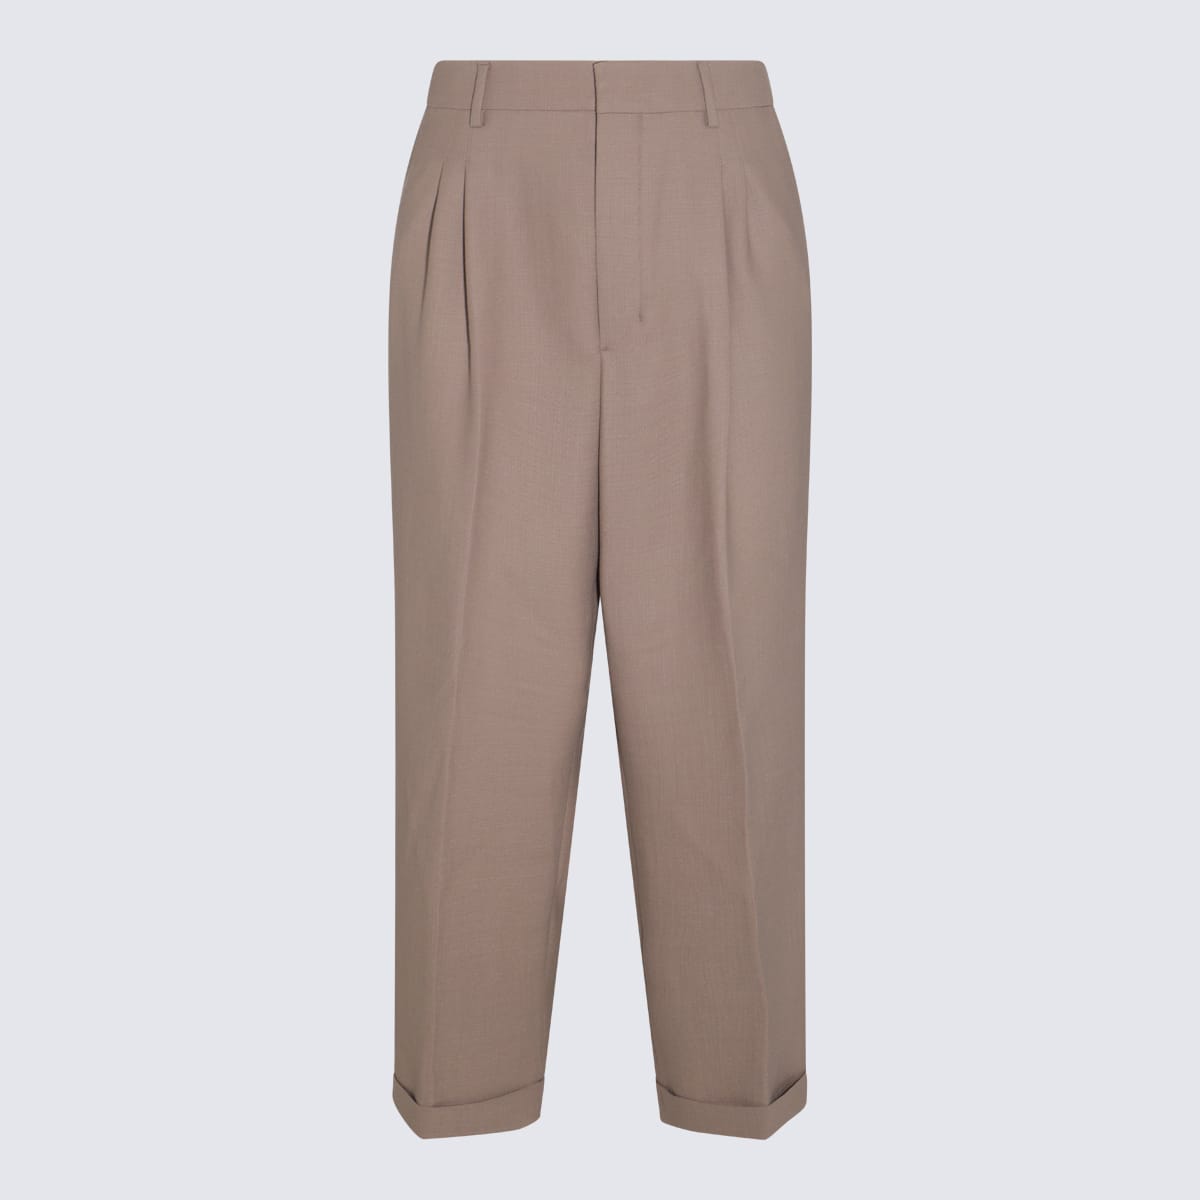 Taupe Wool Blend Pants